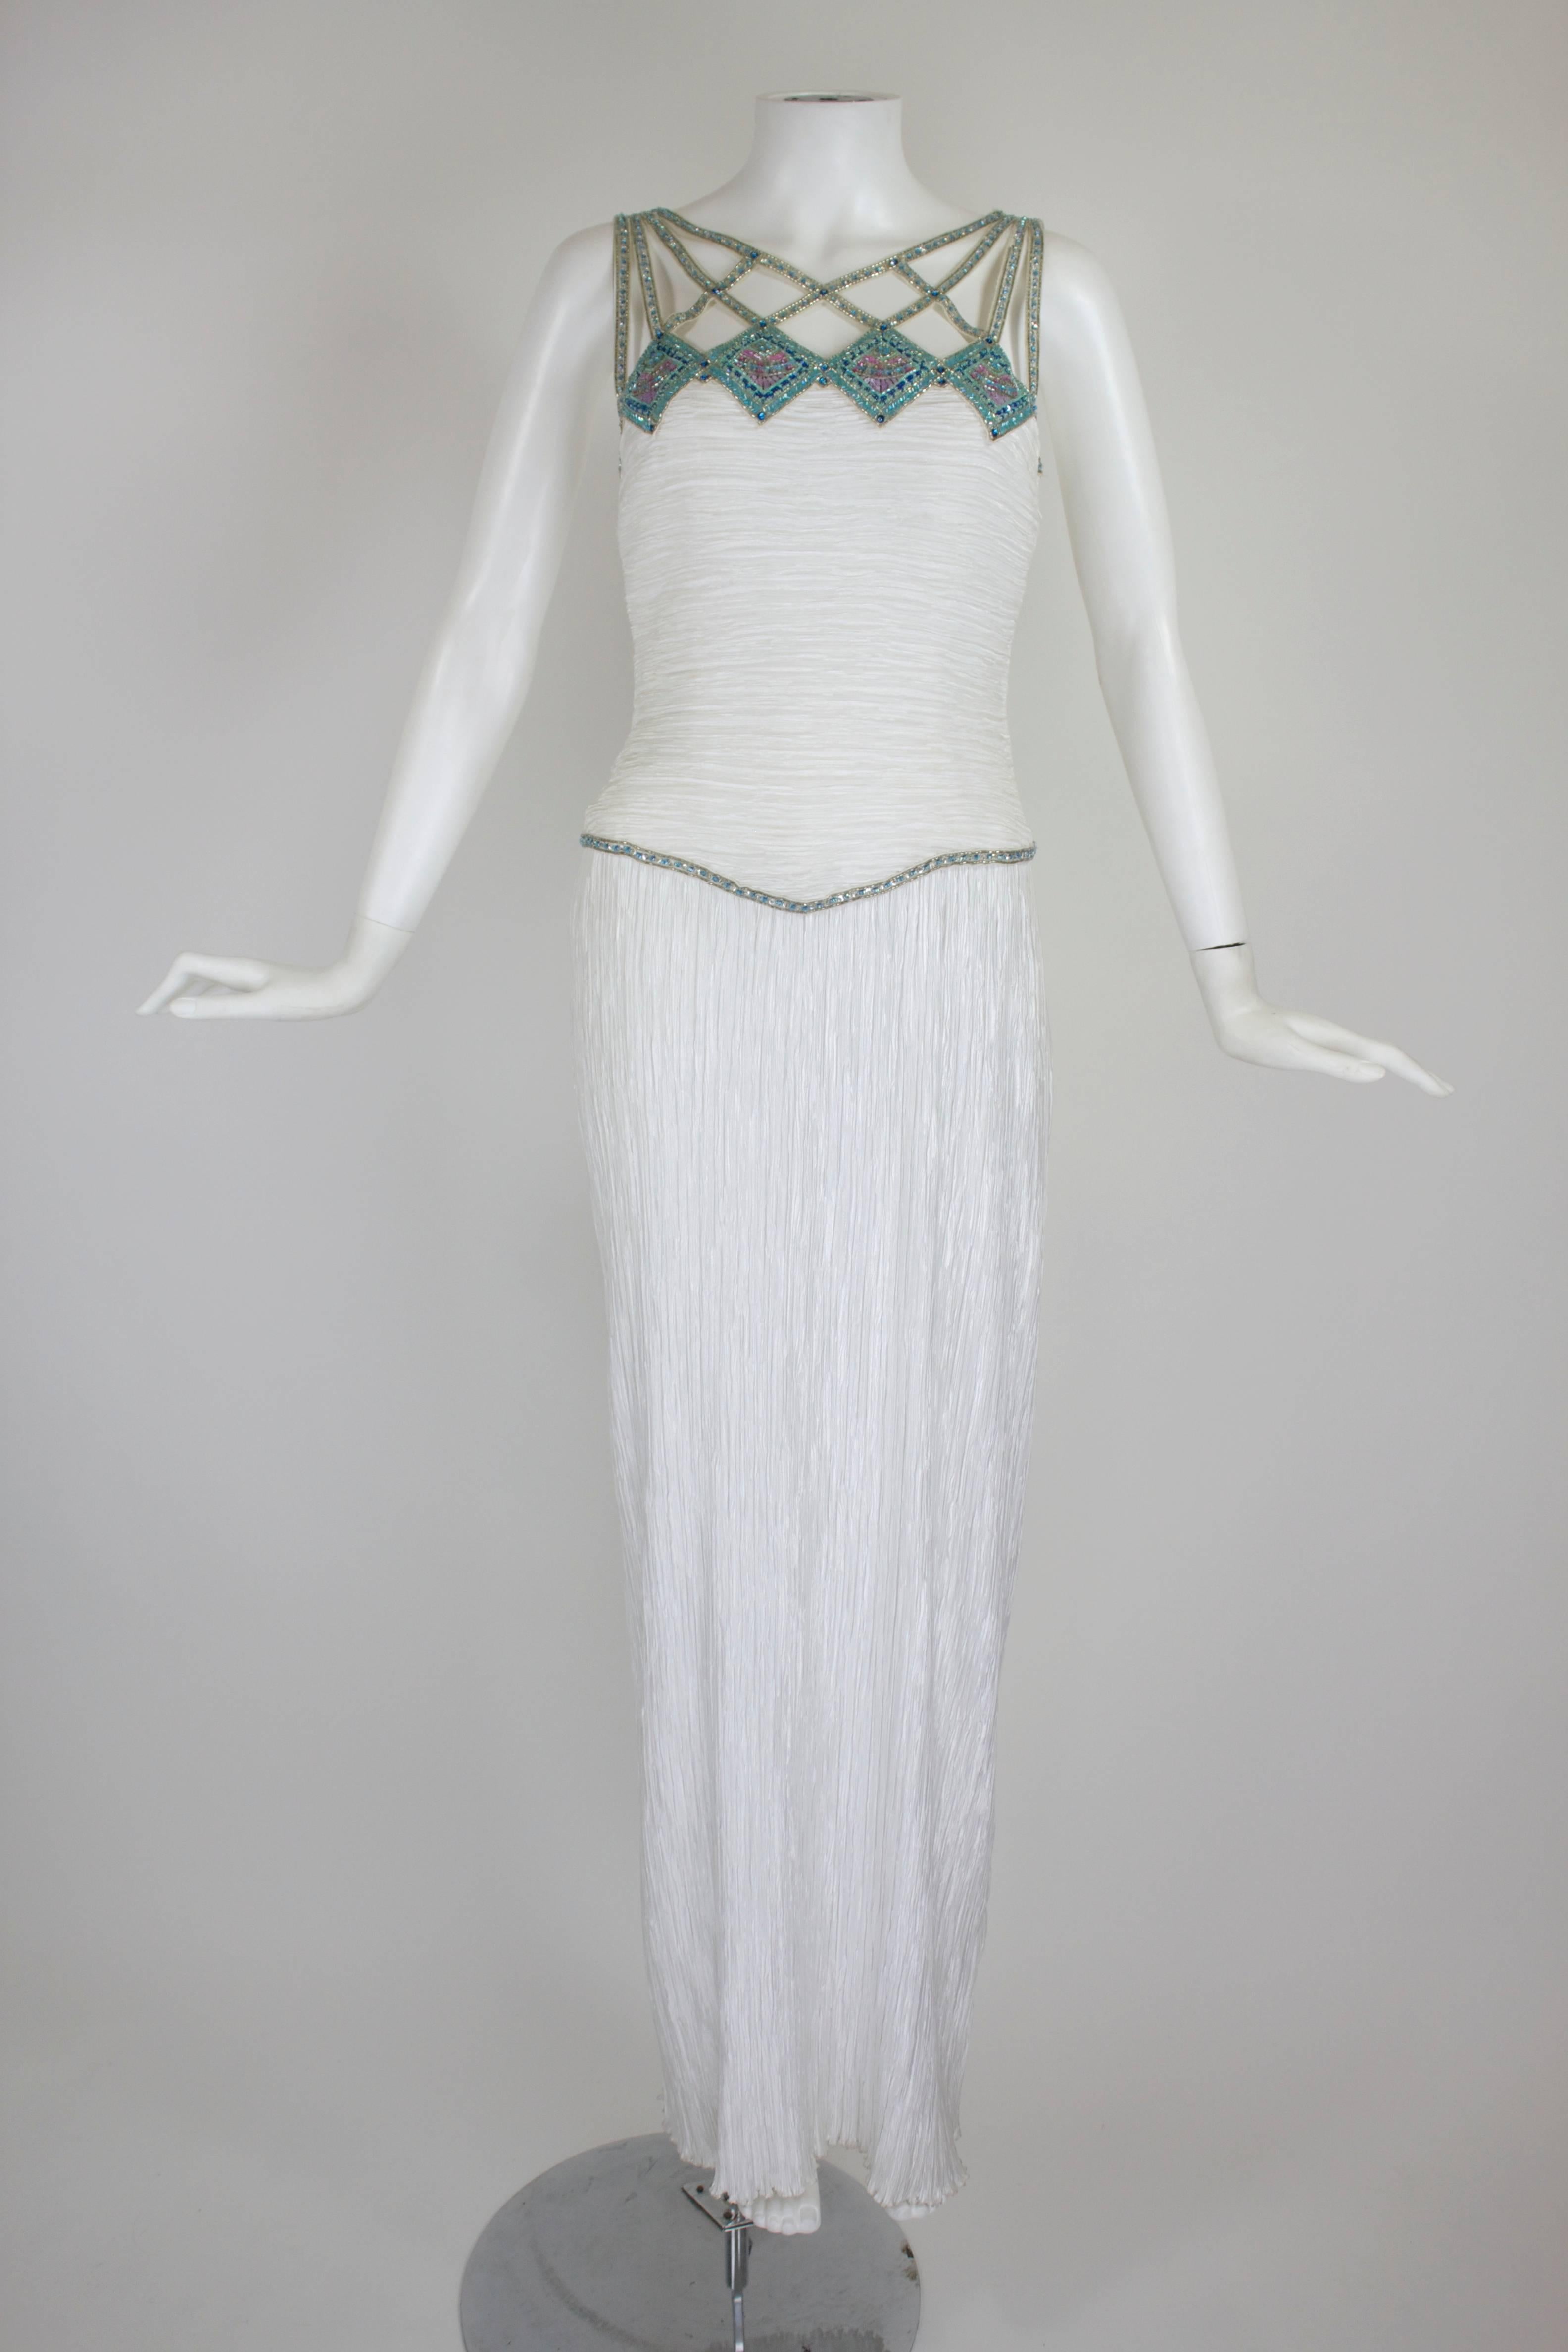 Done in Mary McFadden's iconic micropleats, this gorgeous white column gown features Egyptian revival-inspired beading in a cage pattern across the bodice and shoulders. The fitted bodice allows for a body-skimming, sexy silhouette.